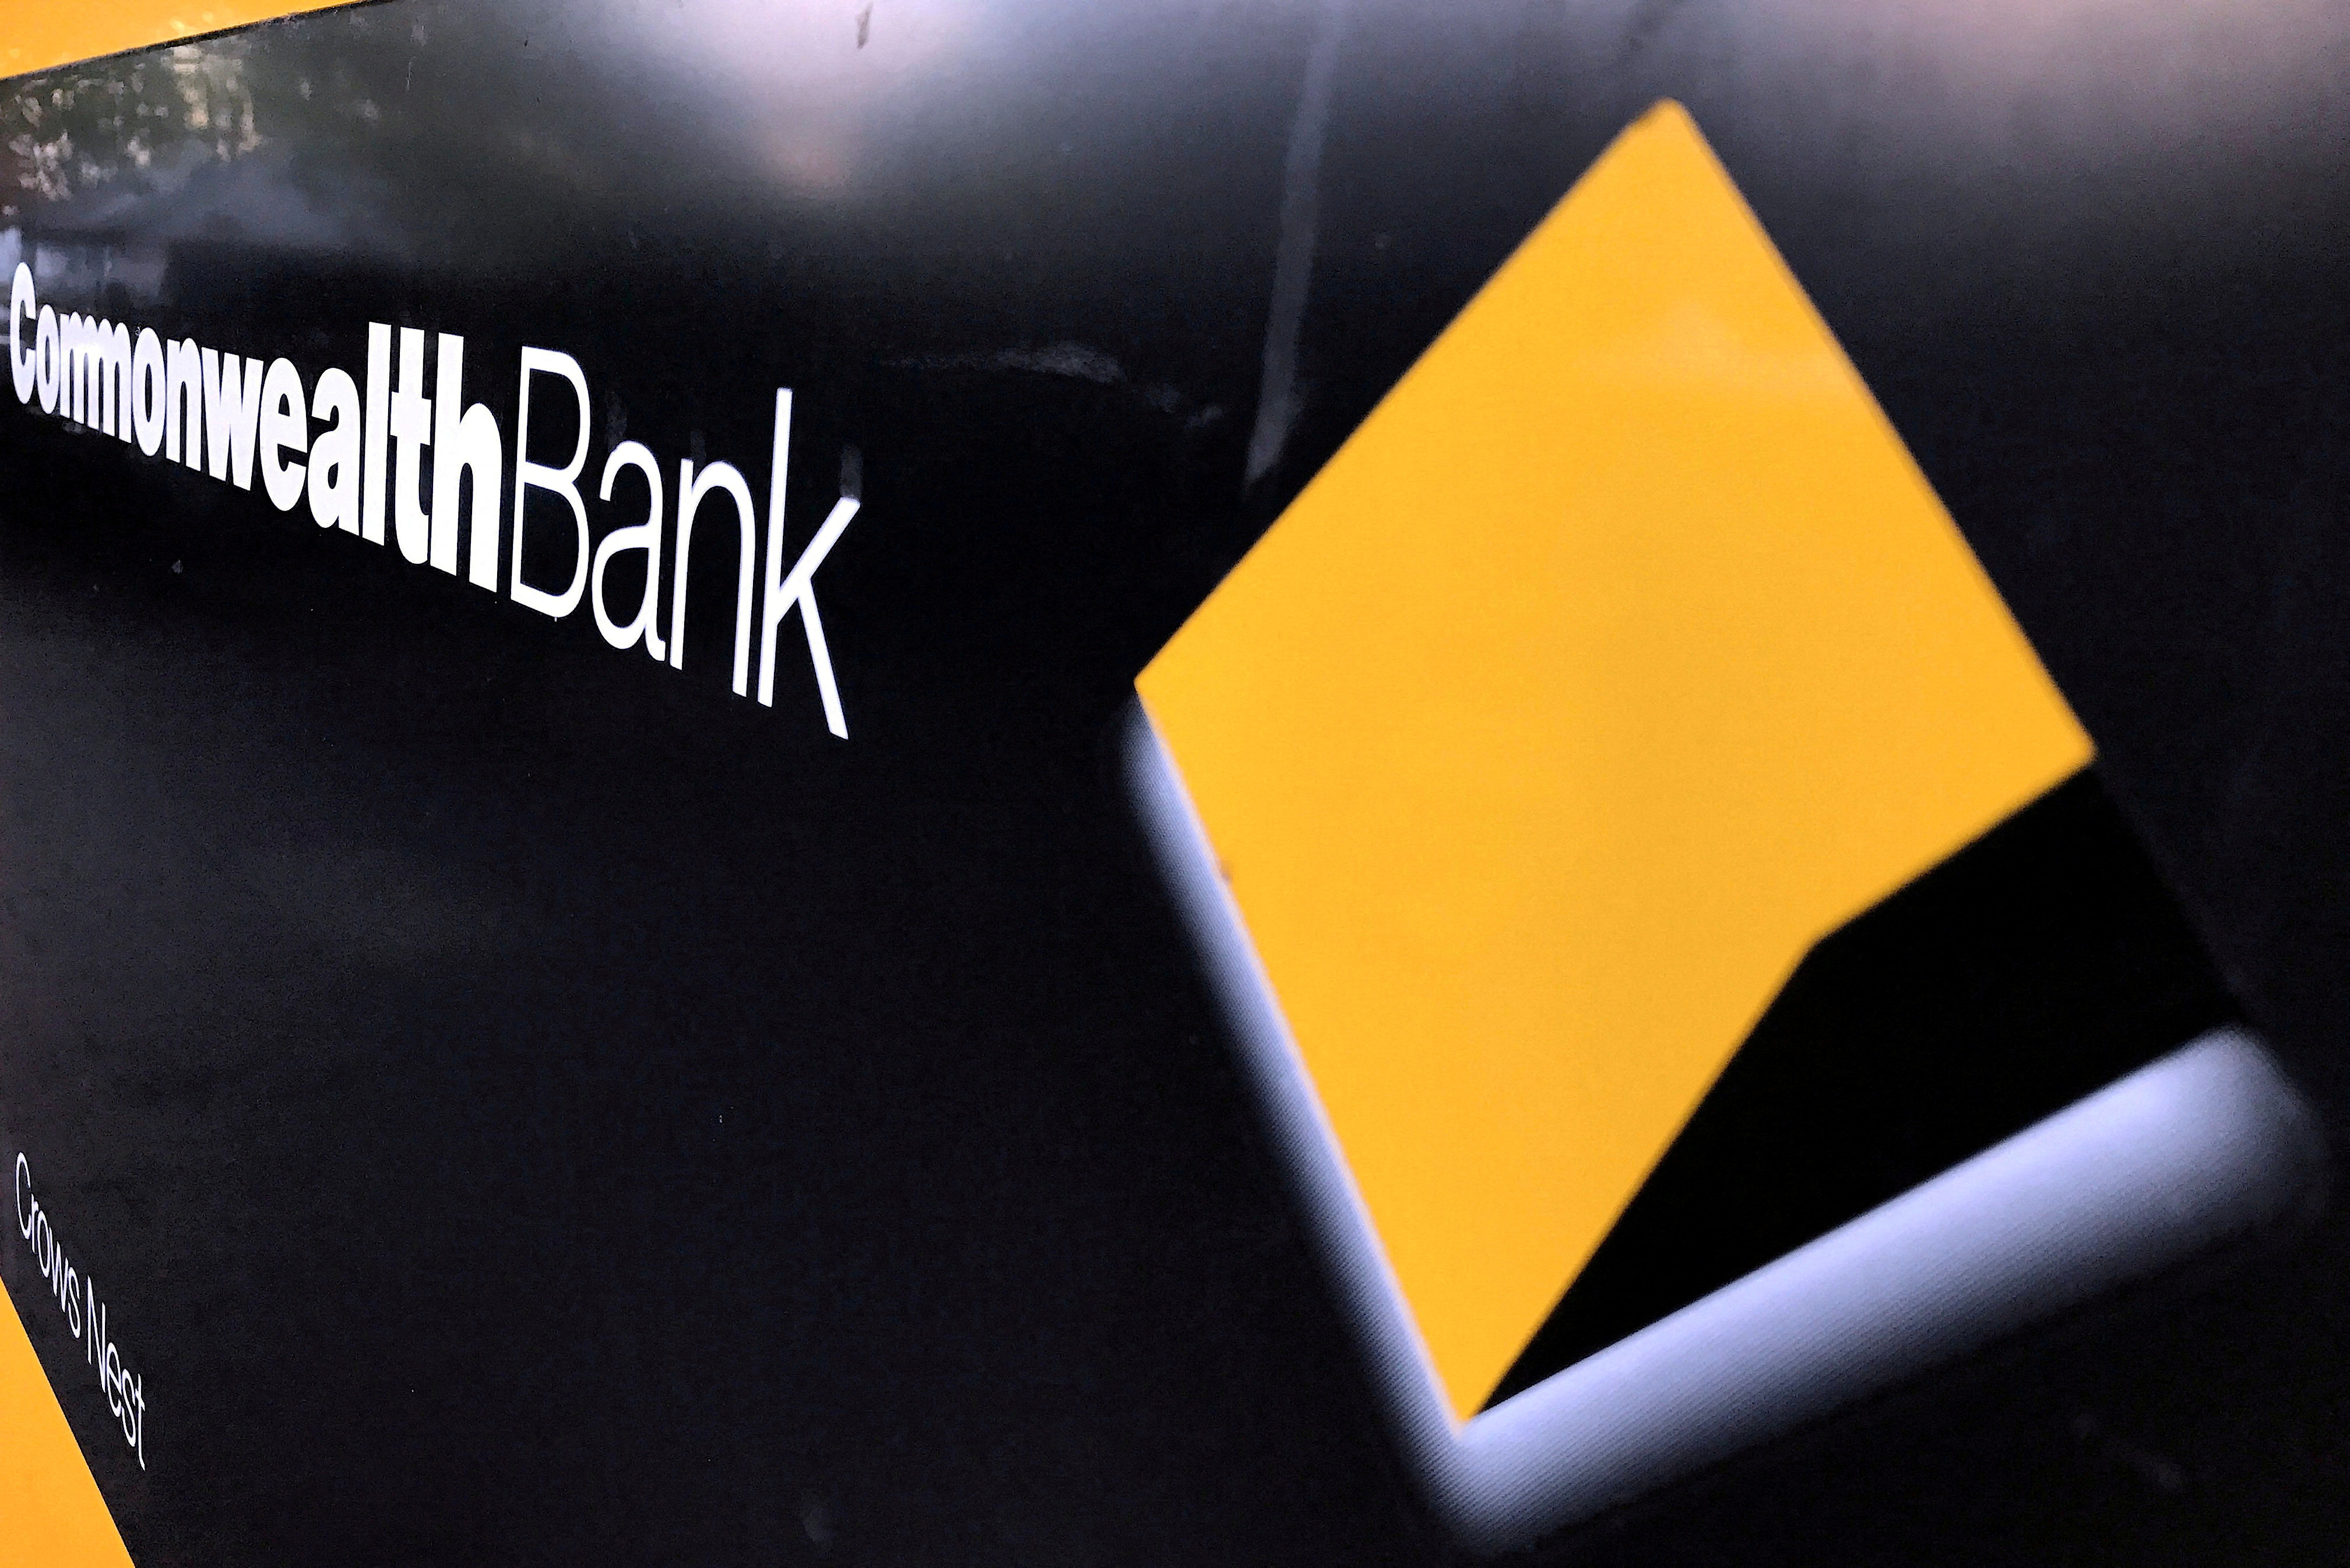 Australia's Commonwealth Bank to Halt Certain Payments to Crypto Exchanges | The Crypto Times